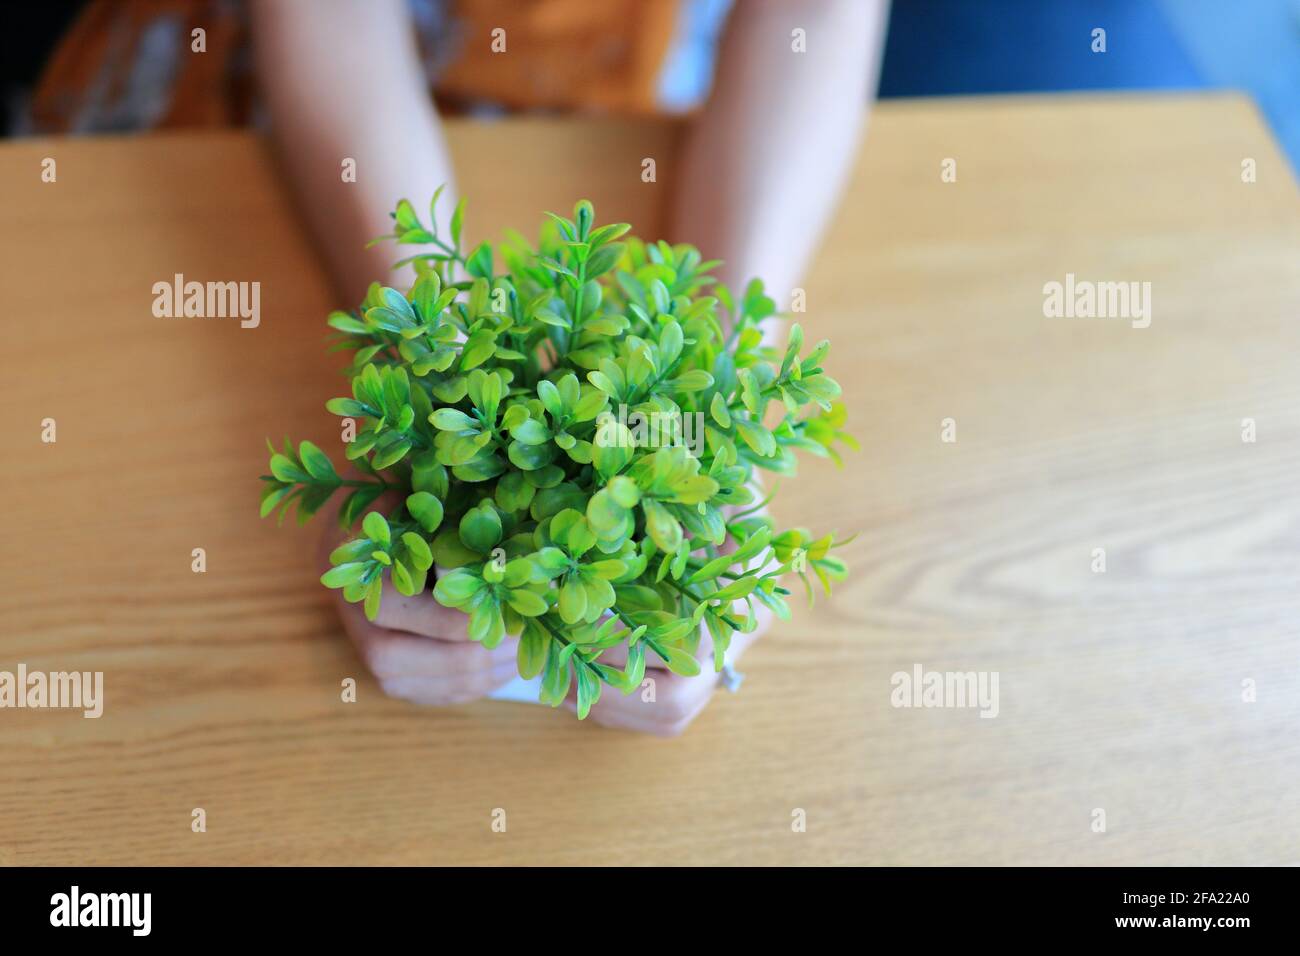 potted plant in hand Stock Photo